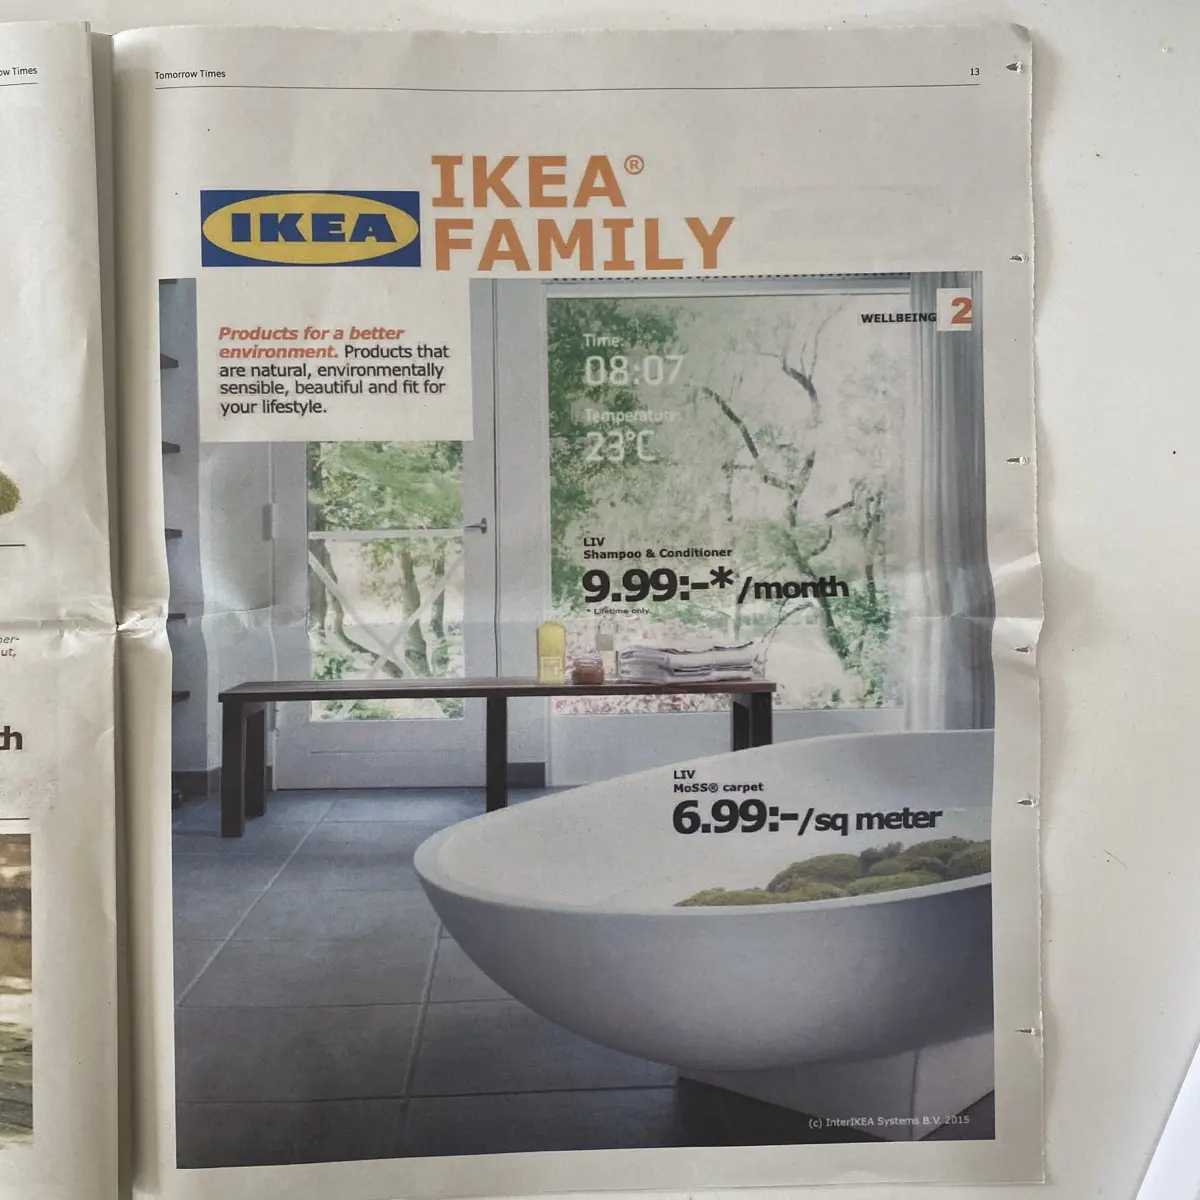 The Design Fiction project IKEA Catalog by Near Future Laboratory in a newspaper advertisement